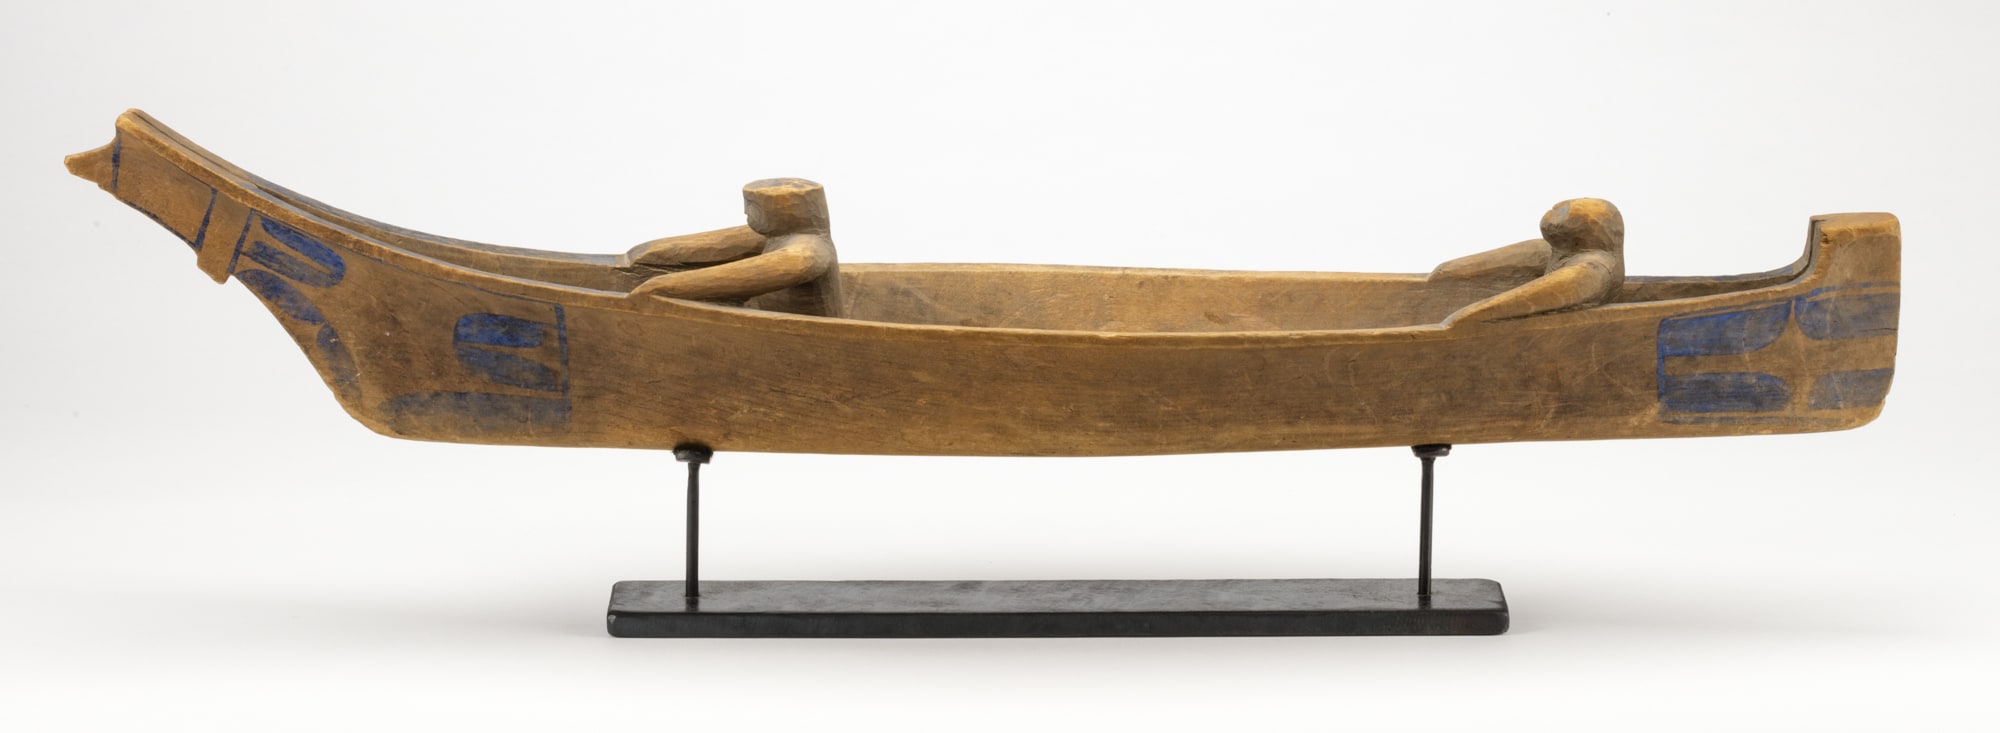 UNIDENTIFIED MAKER, NUU-CHAH-NULTH, Model Canoe with Two Figures